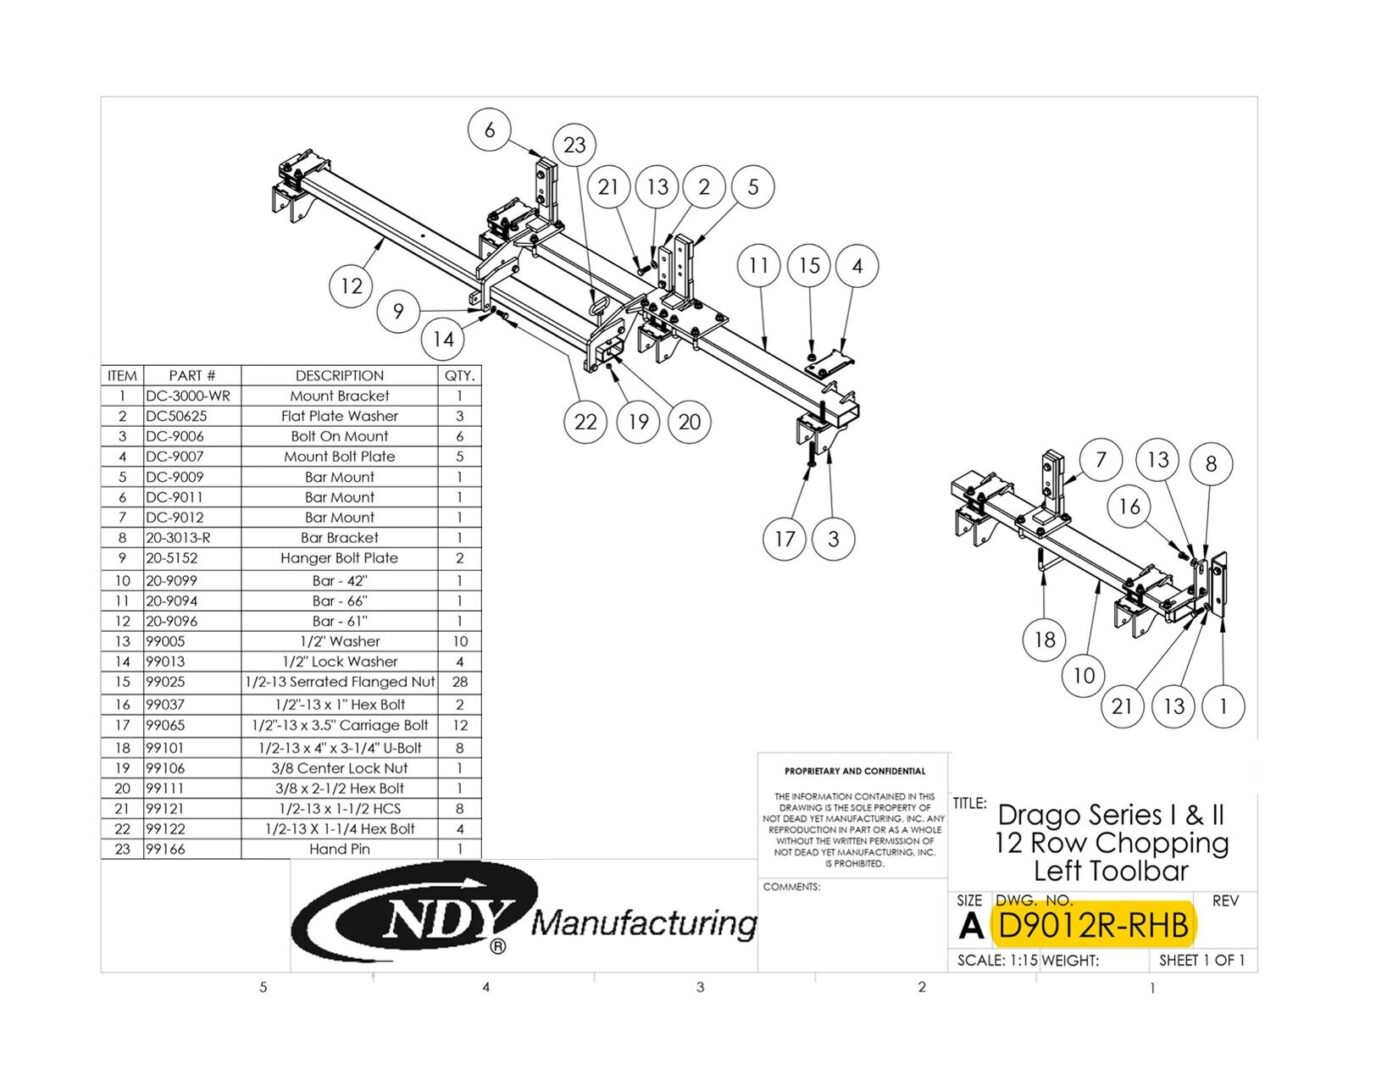 A diagram showing the parts of a Stalk Stomper Right Toolbar for Drago Series I & II 12 Row Chopping, Rigid Corn Head manufacturing - nydy manufacturing - nydy.